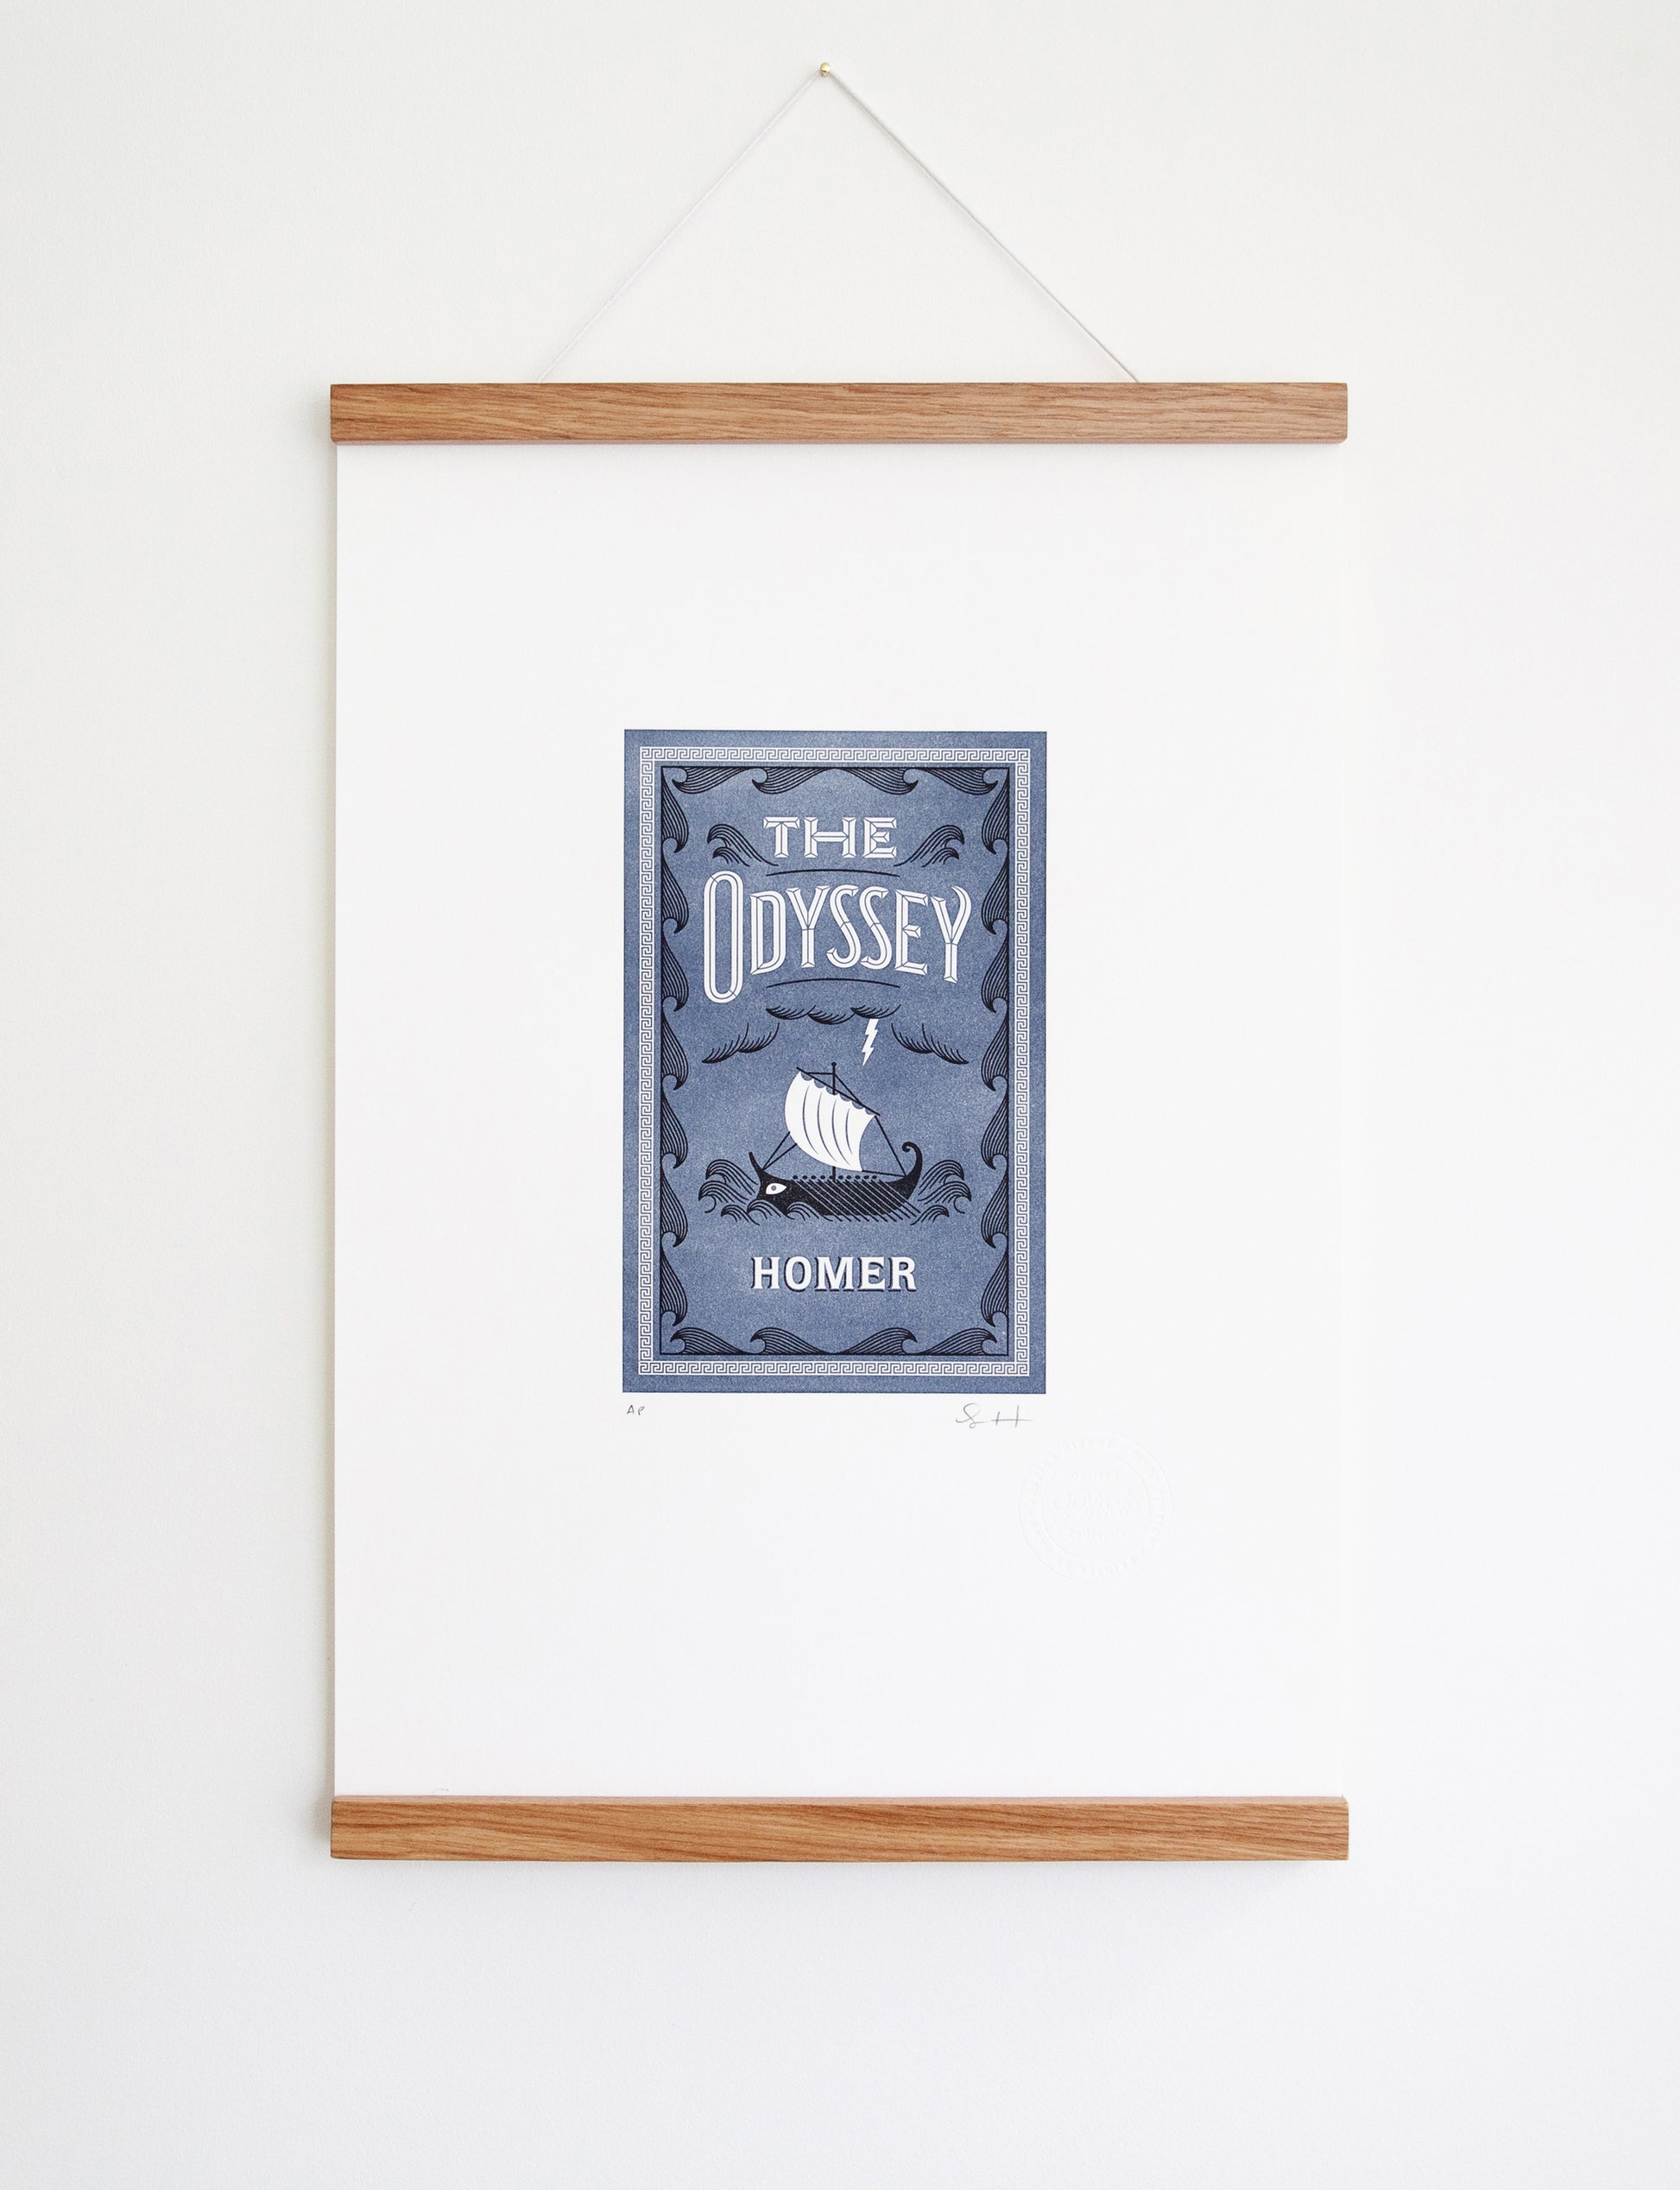 Framed 2-color letterpress print in blue and black. Printed artwork is an illustrated book cover of The Adventures of The Odyssey including custom hand lettering.